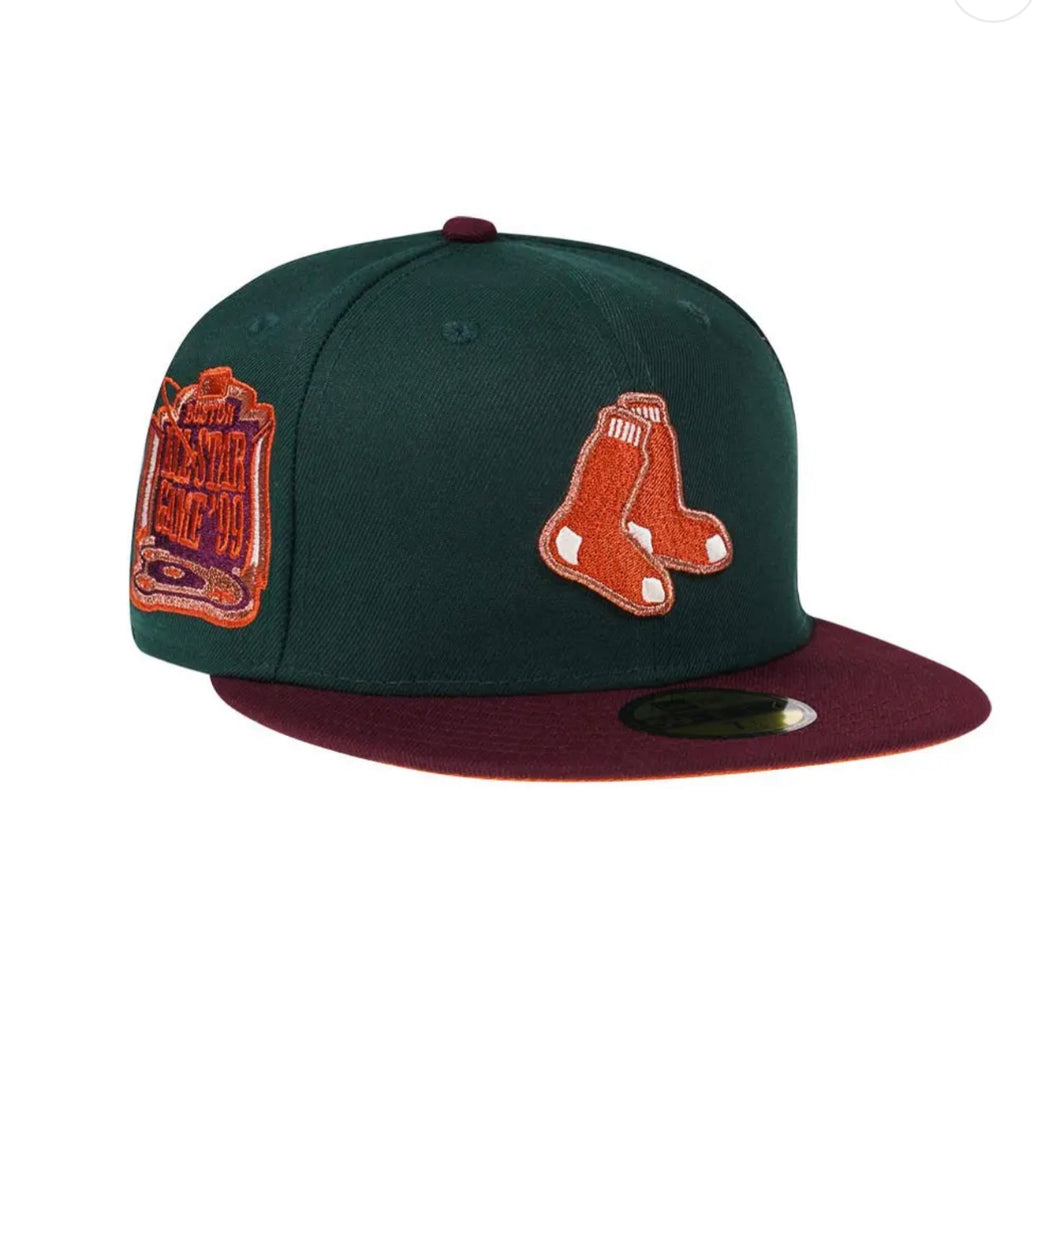 NEW ERA BOSTON RED SOX ALL STAR GAME 1999 COPPER OLIVE TWO TONE EDITION 59FIFTY FITTED HAT